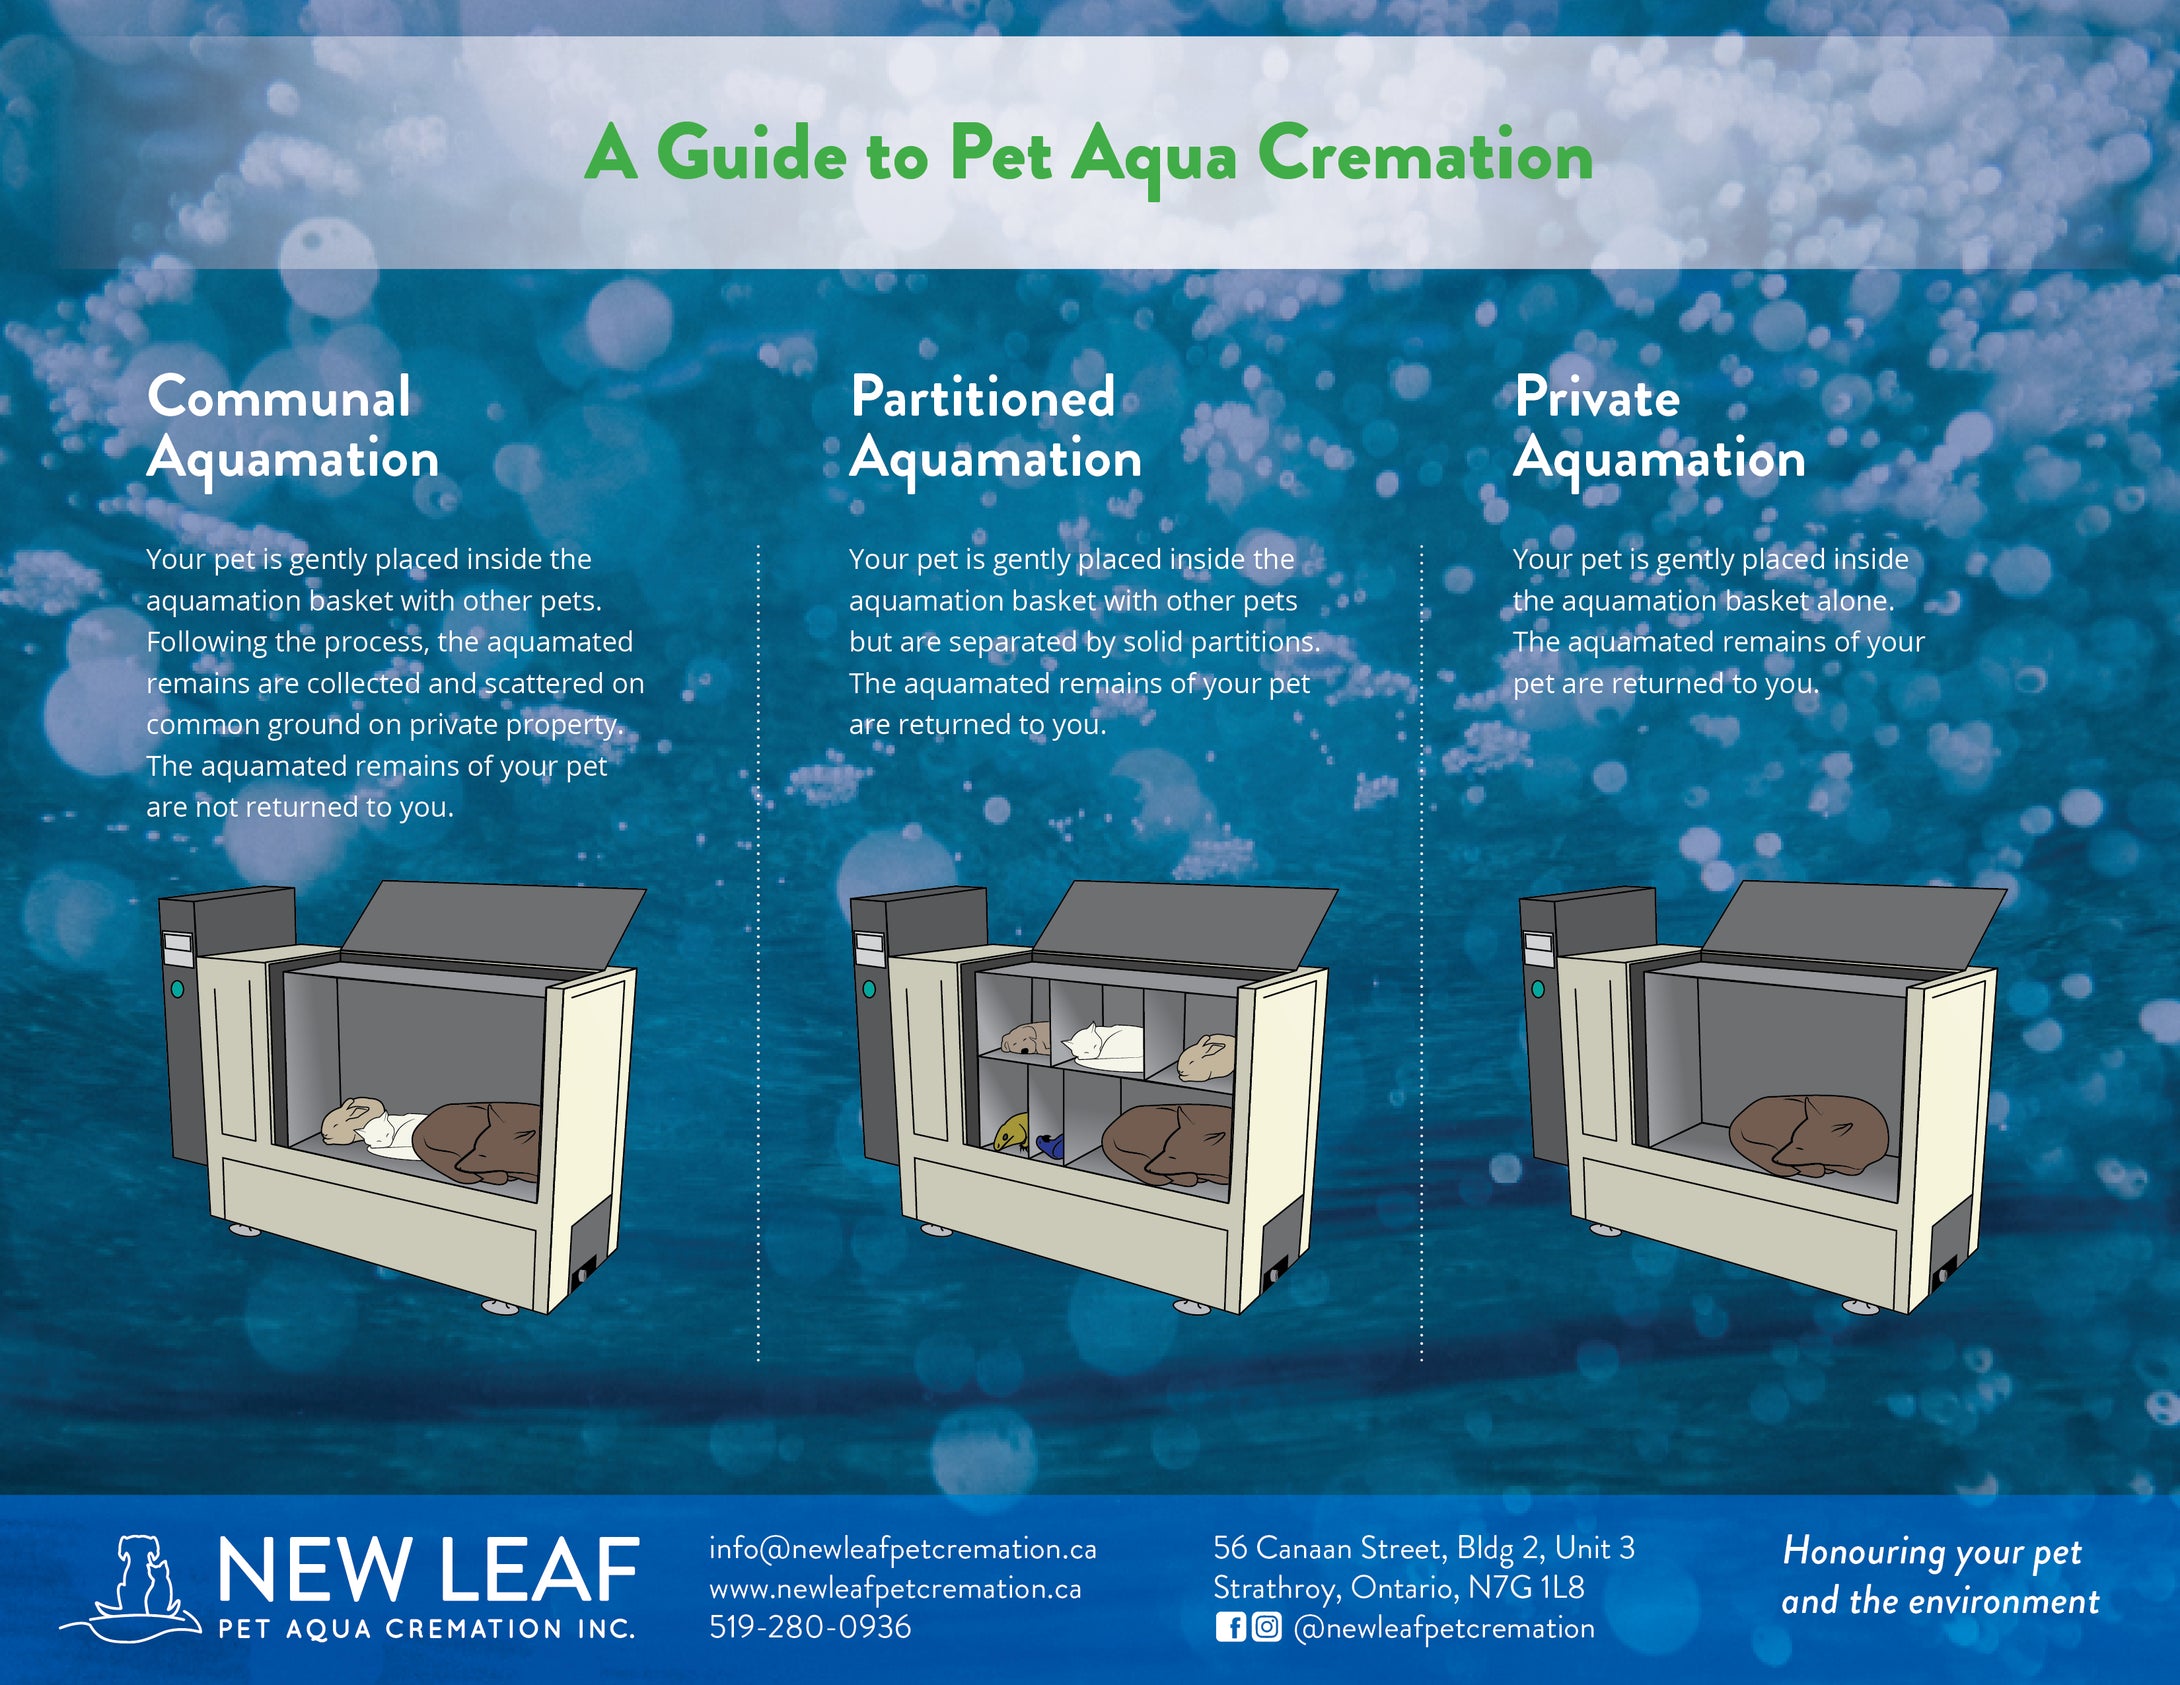 A guide to water cremation for pets from New Leaf Pet Aqua Cremation